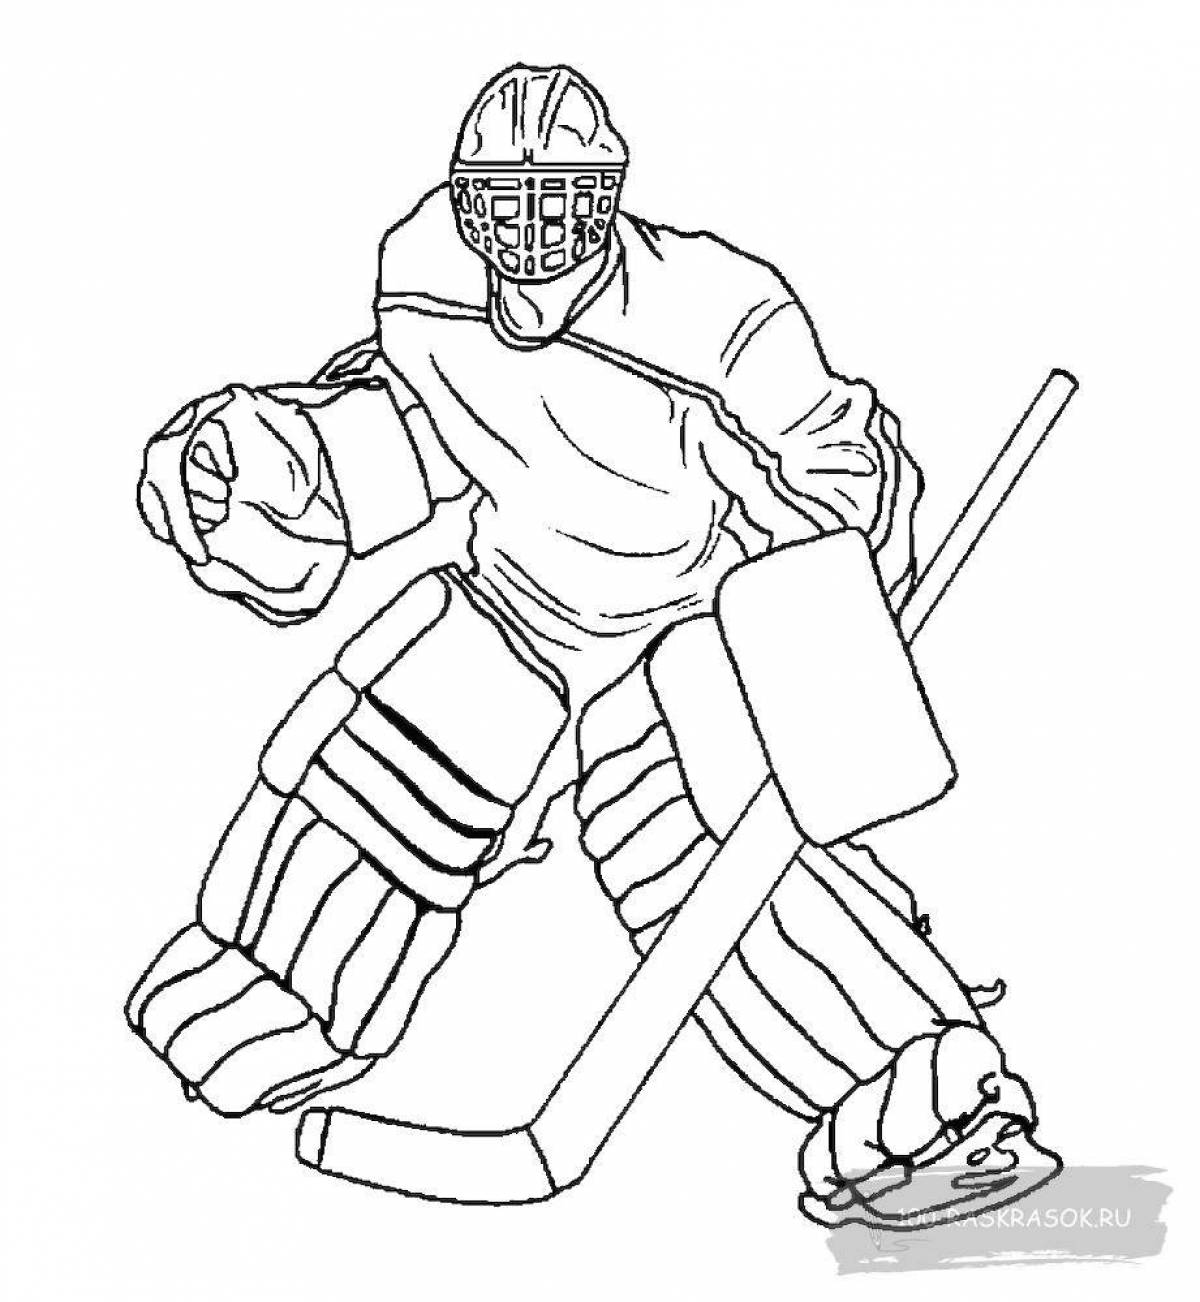 Playful hockey coloring book for kids